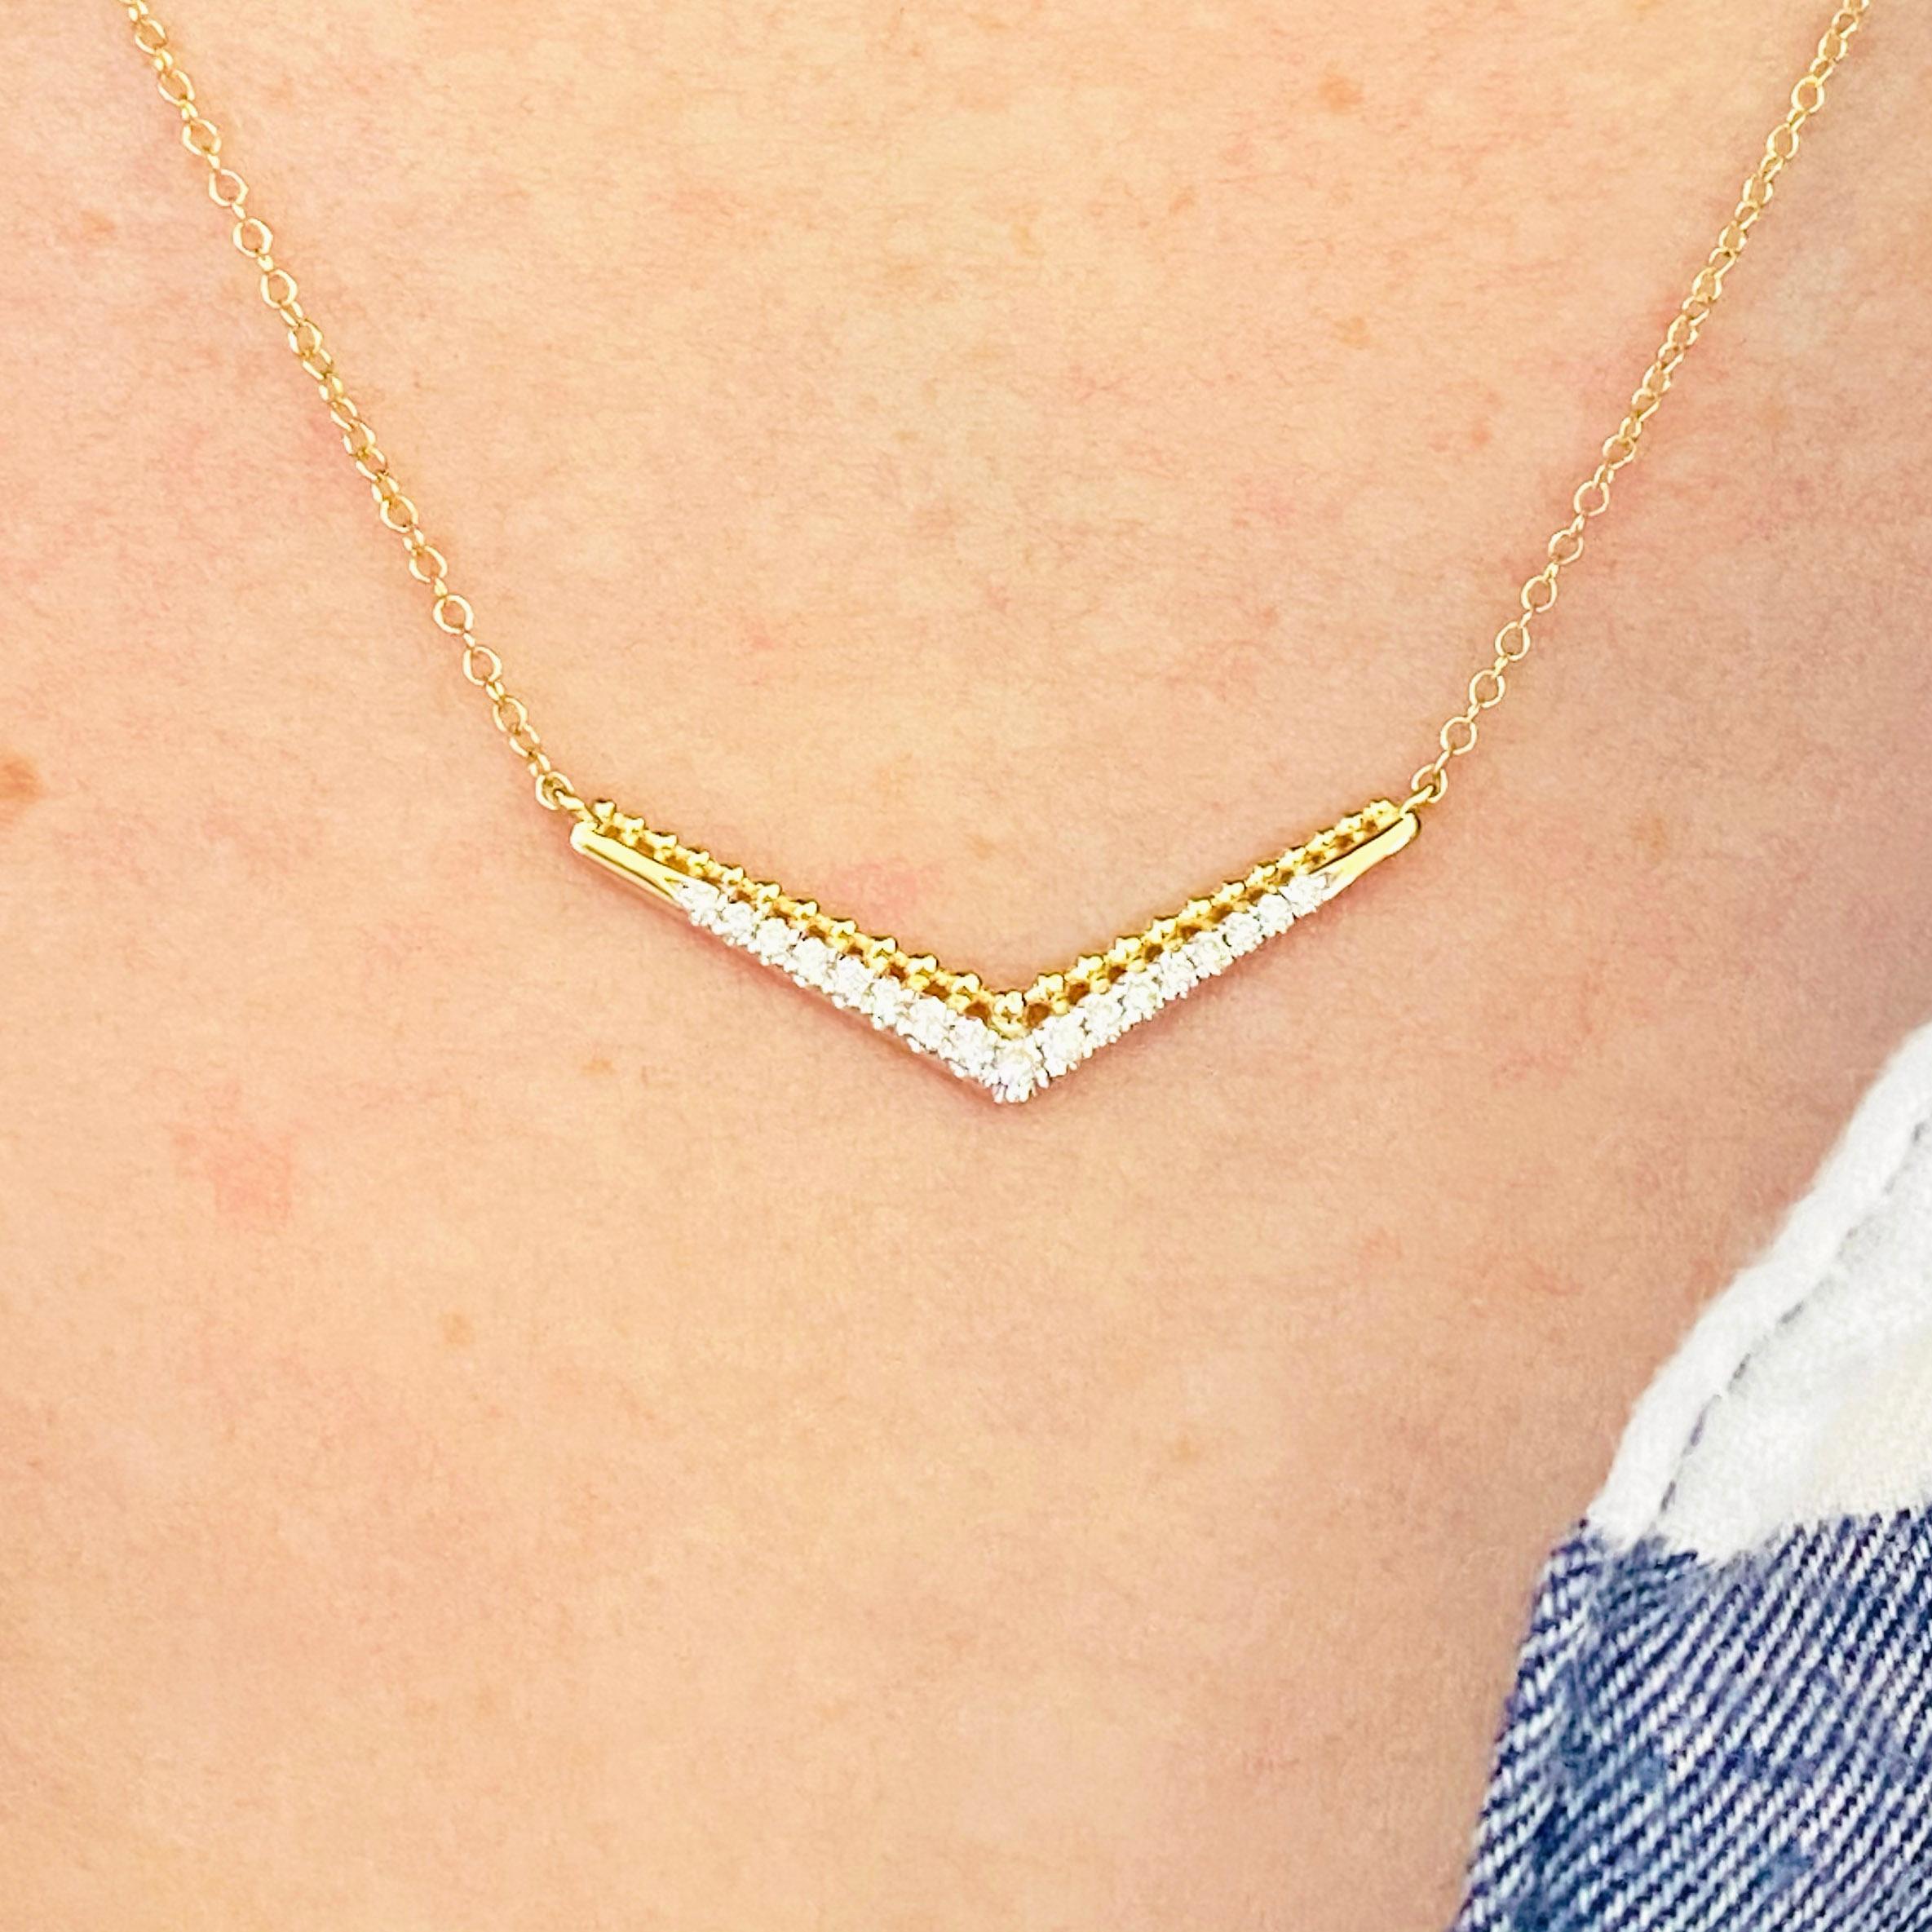 This gorgeous 14k yellow gold beaded chevron bar necklace dripping with brilliant diamonds is sure to put a smile on anyone's face! This necklace looks beautiful worn by itself and also looks wonderful in a necklace stack. This necklace would make a